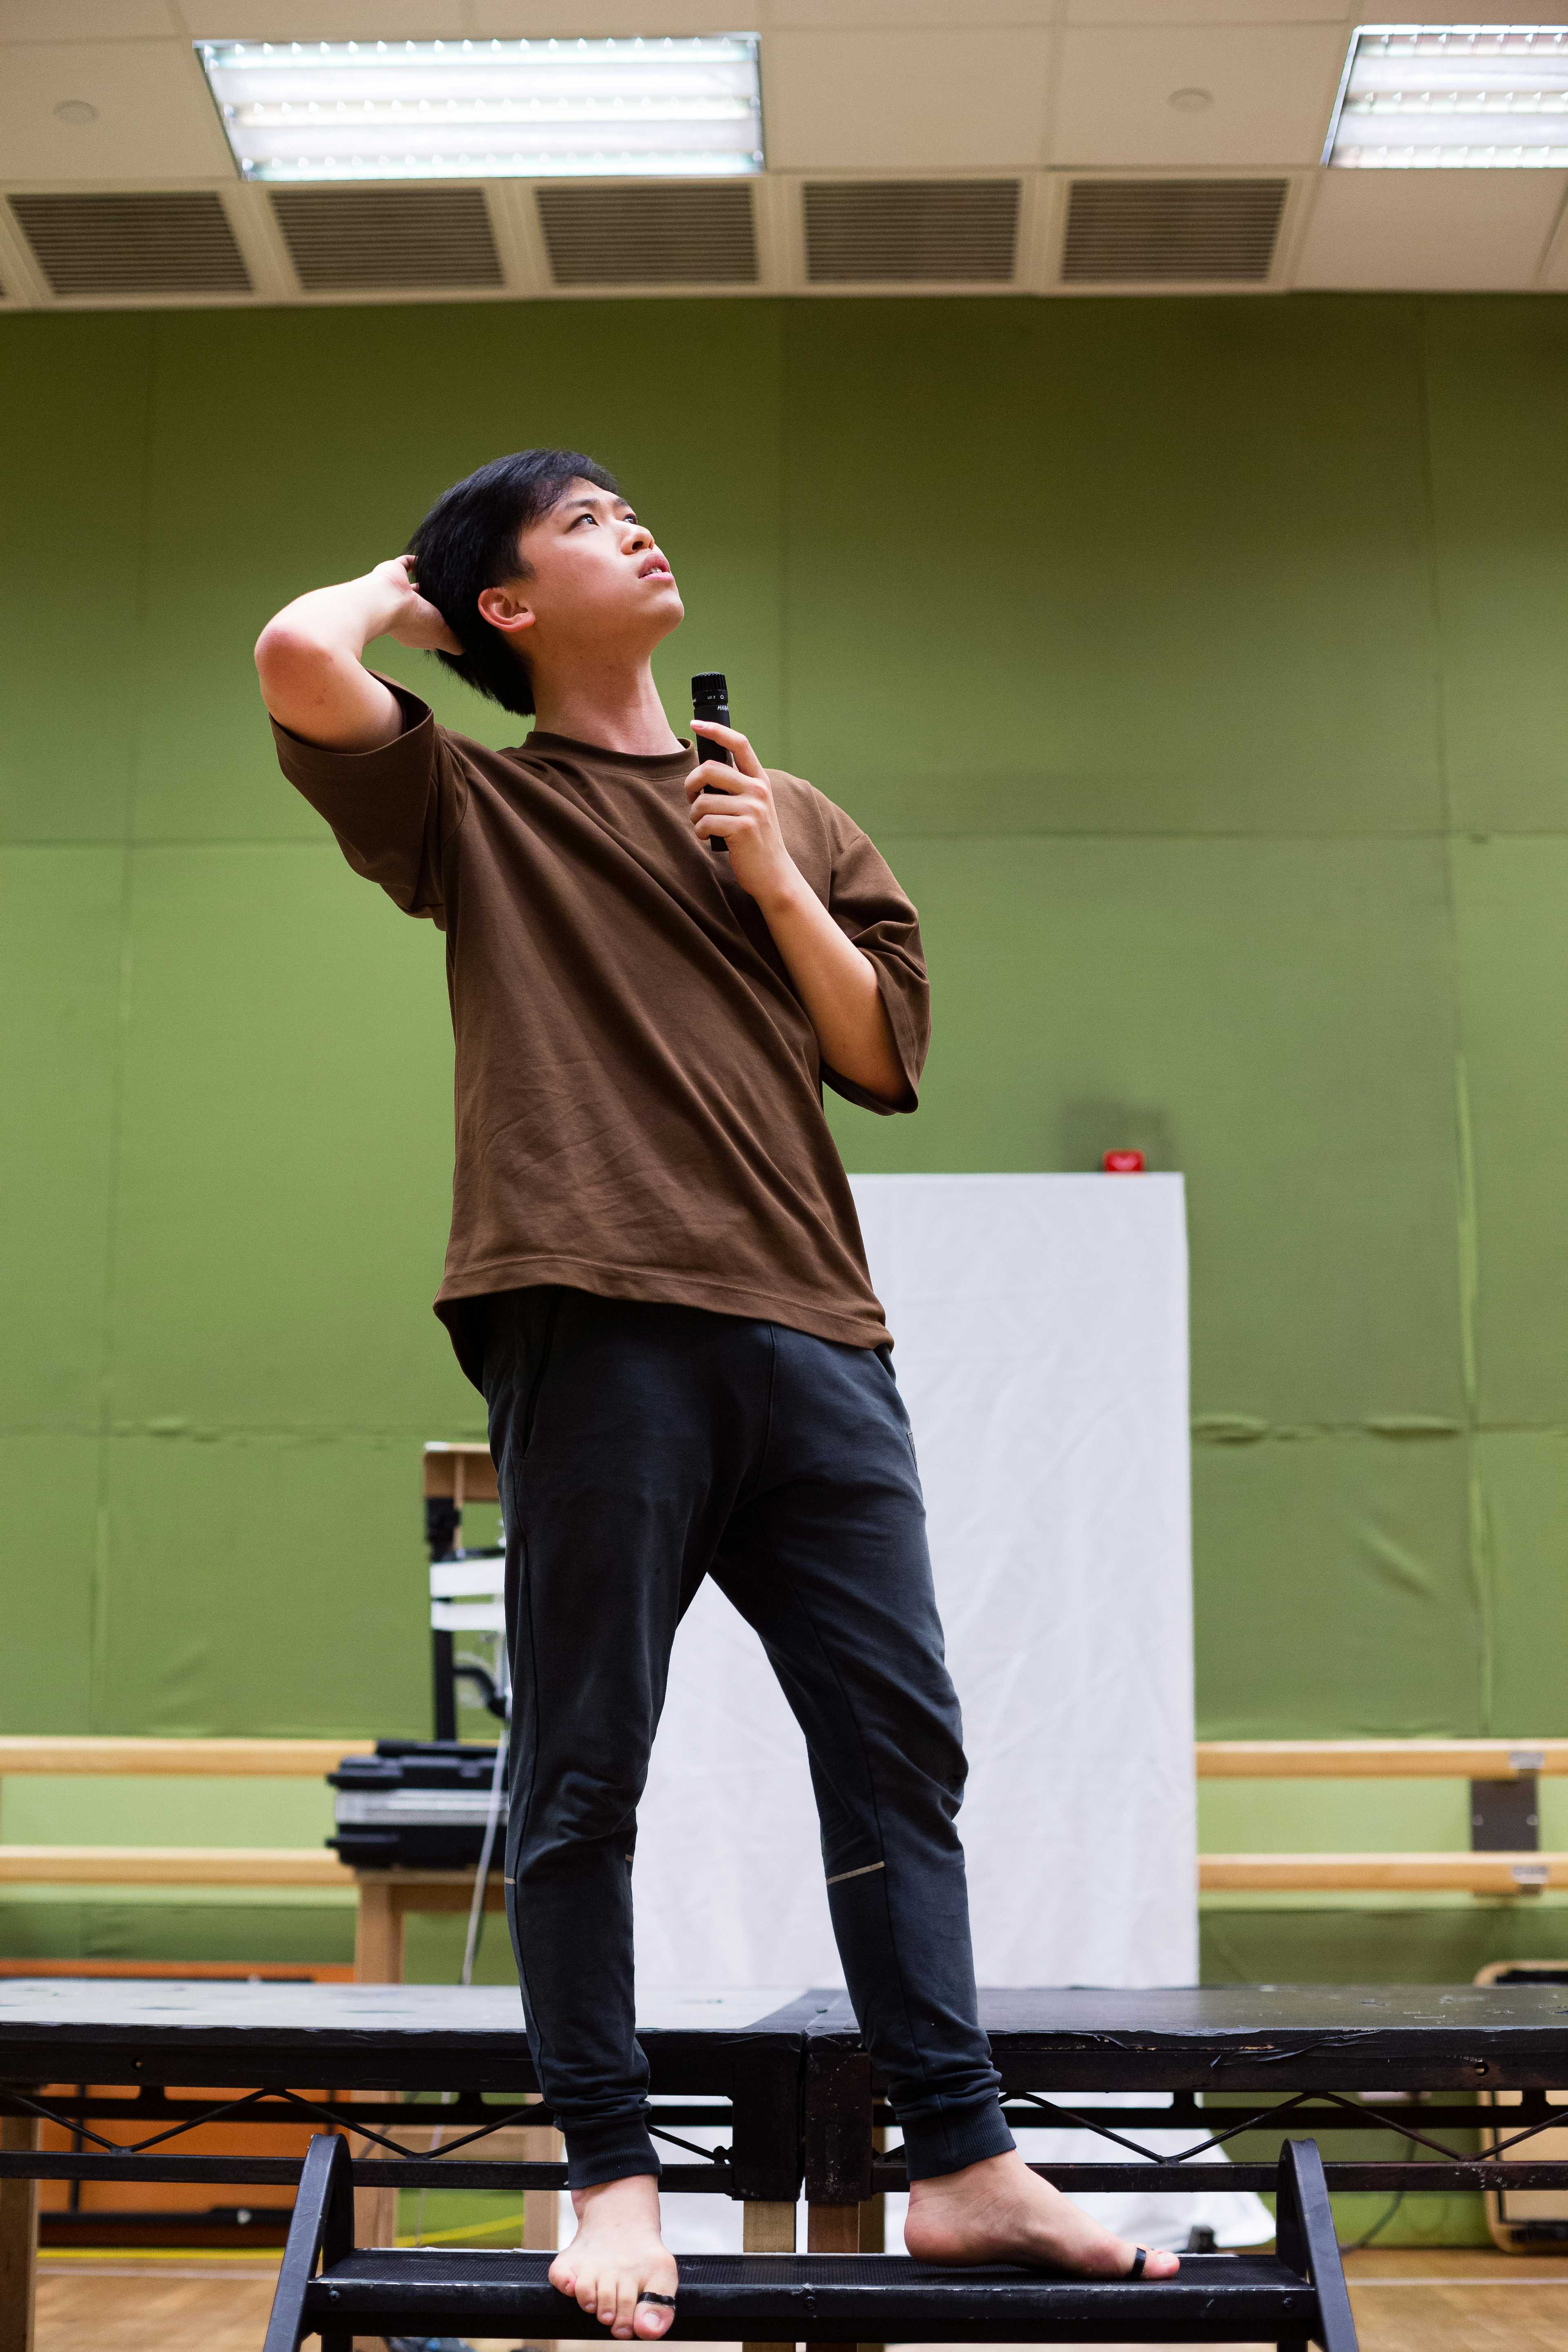 Songs of Innocence and Experience Rehearsal | Featuring: Chew Yu-yeung | Tagged as: Songs of Innocence and Experience, Rehearsal | Photo: Ivor Houlker, Rooftop Productions |  (Rooftop Productions • Hong Kong Theatre Company)  | Rooftop Productions • Hong Kong Theatre Company